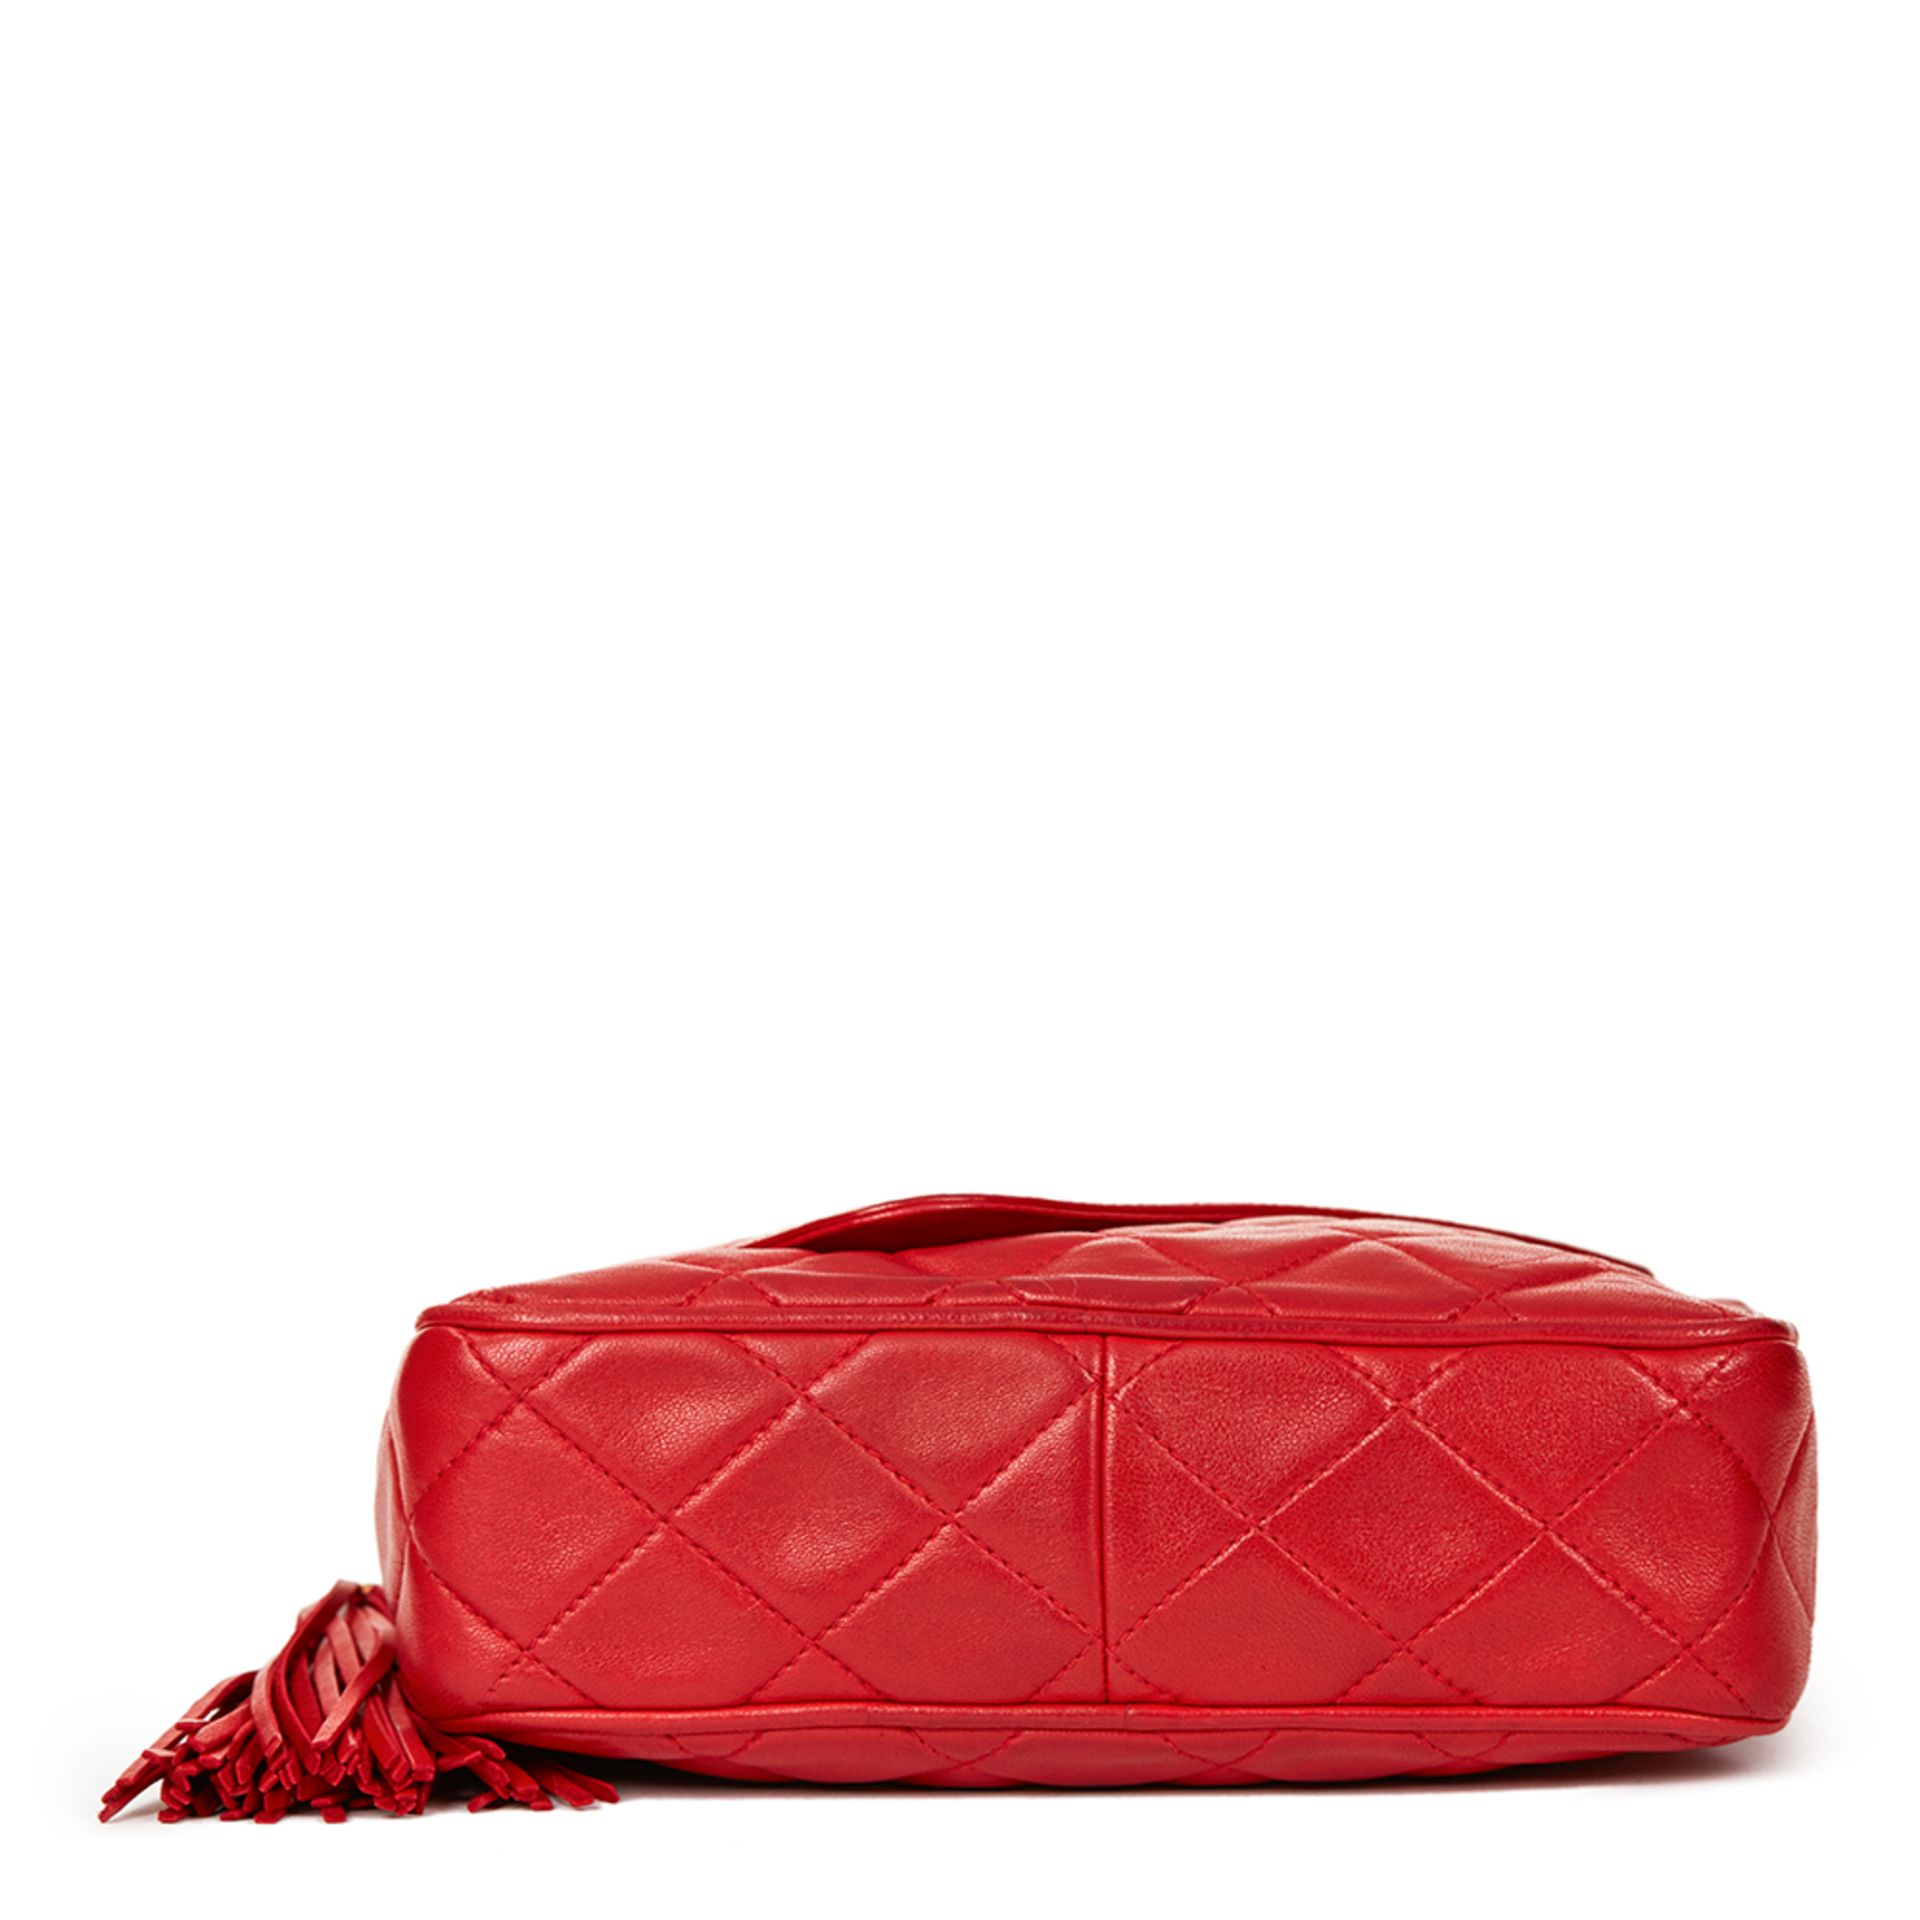 Chanel Red Quilted Lambskin Vintage Camera Bag - Image 4 of 10